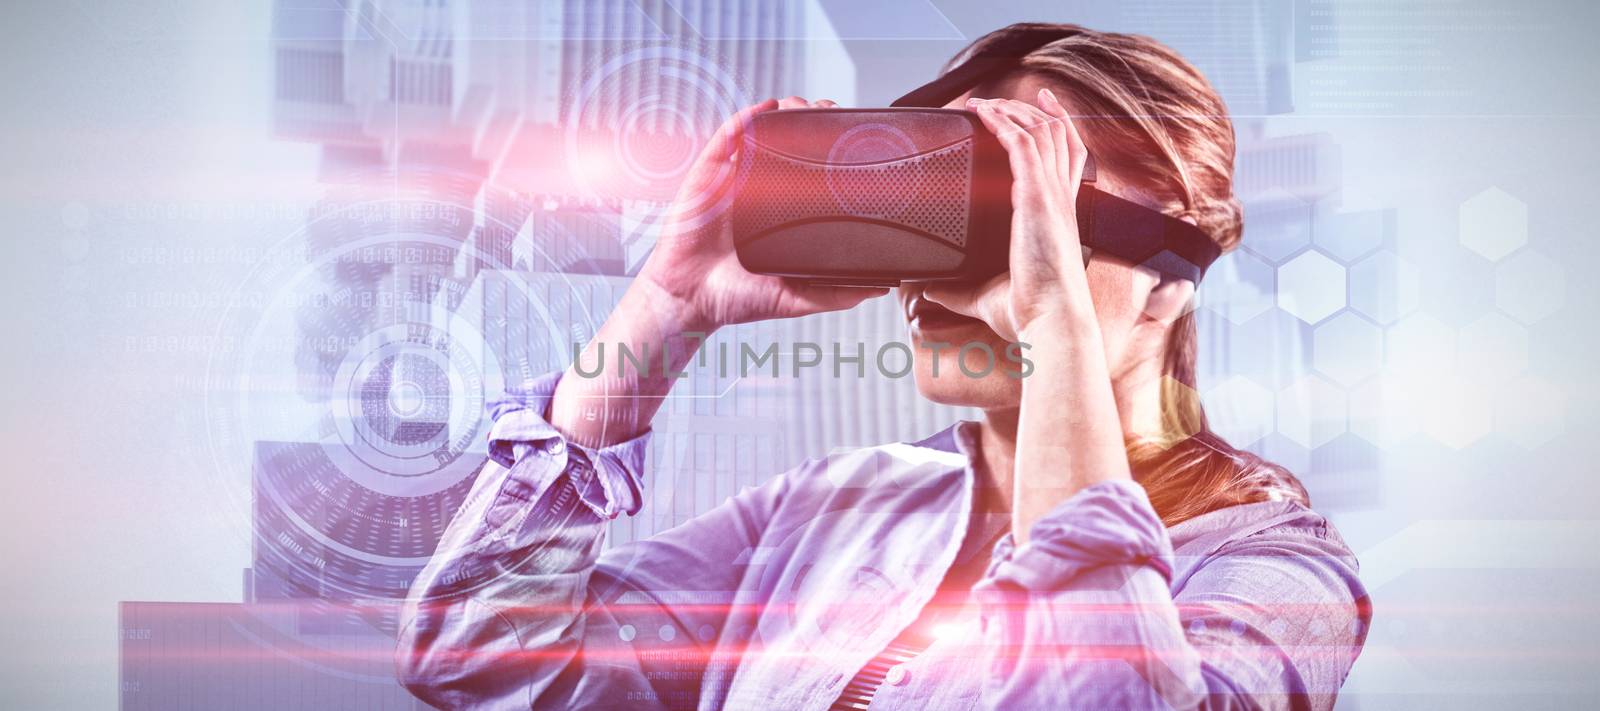 Composite image of woman using an oculus by Wavebreakmedia